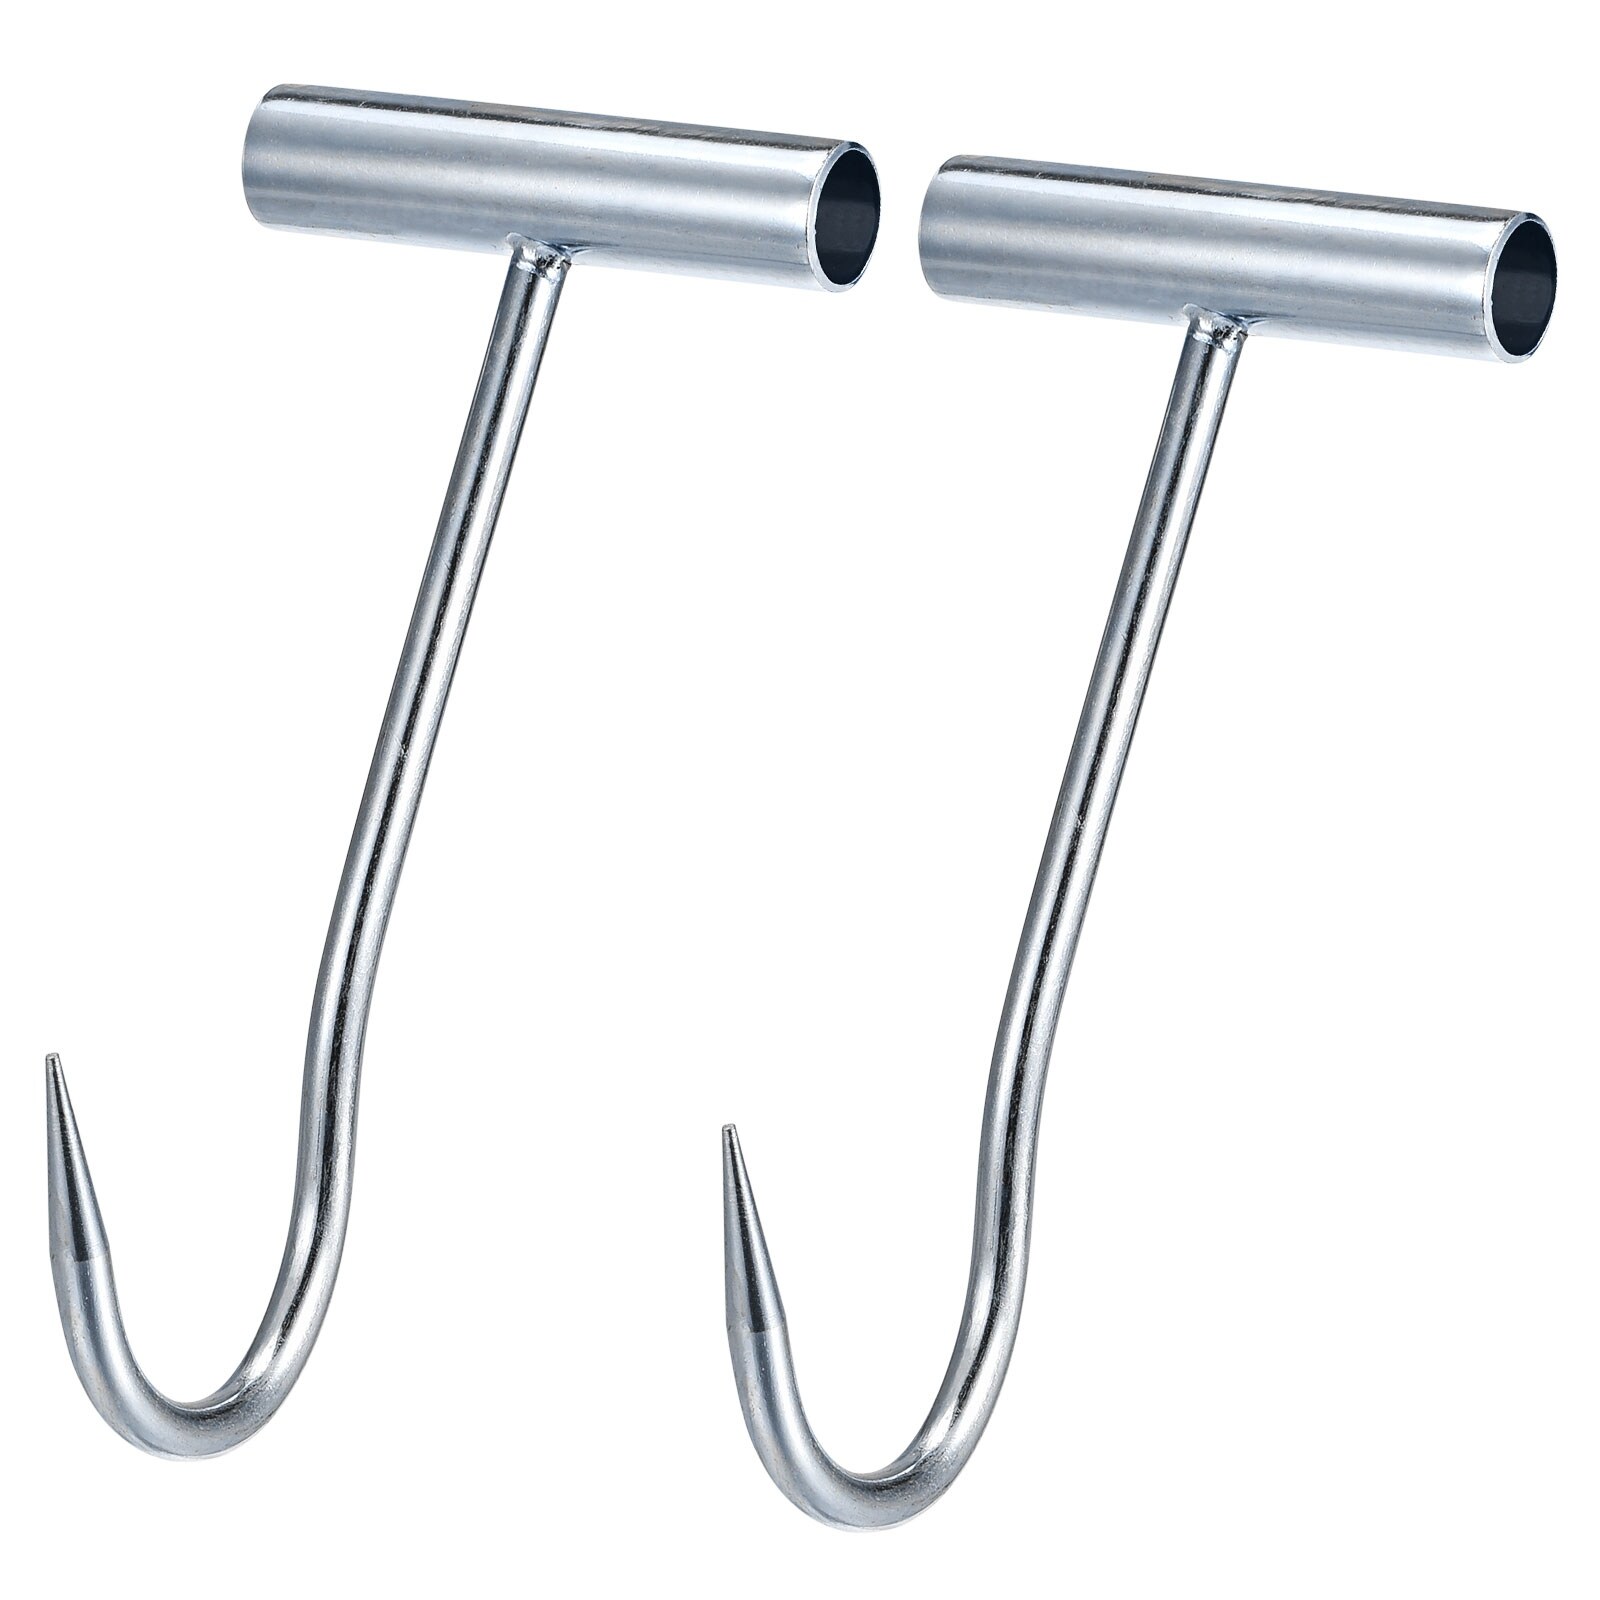 https://ak1.ostkcdn.com/images/products/is/images/direct/077bc77c69c2547de1b21006dd49871785271e7e/T-Handle-Meat-Boning-Hooks%2C-Stainless-Steel-T-Hooks-for-Kitchen.jpg